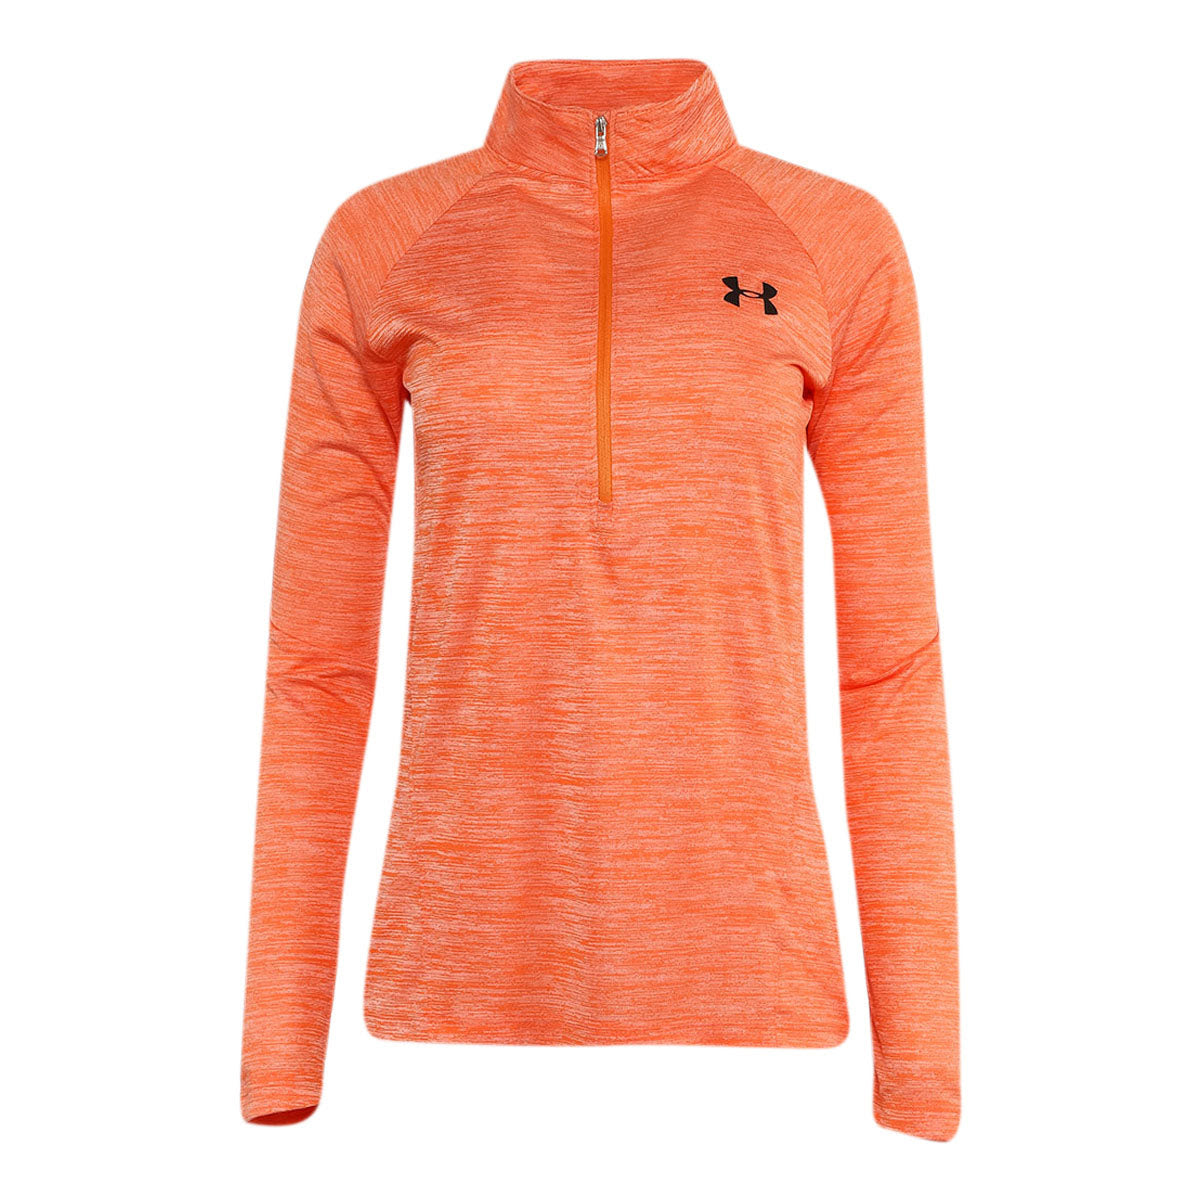 Under Armour Women's 1/2 Zip Pullover 2 for $35+FS!